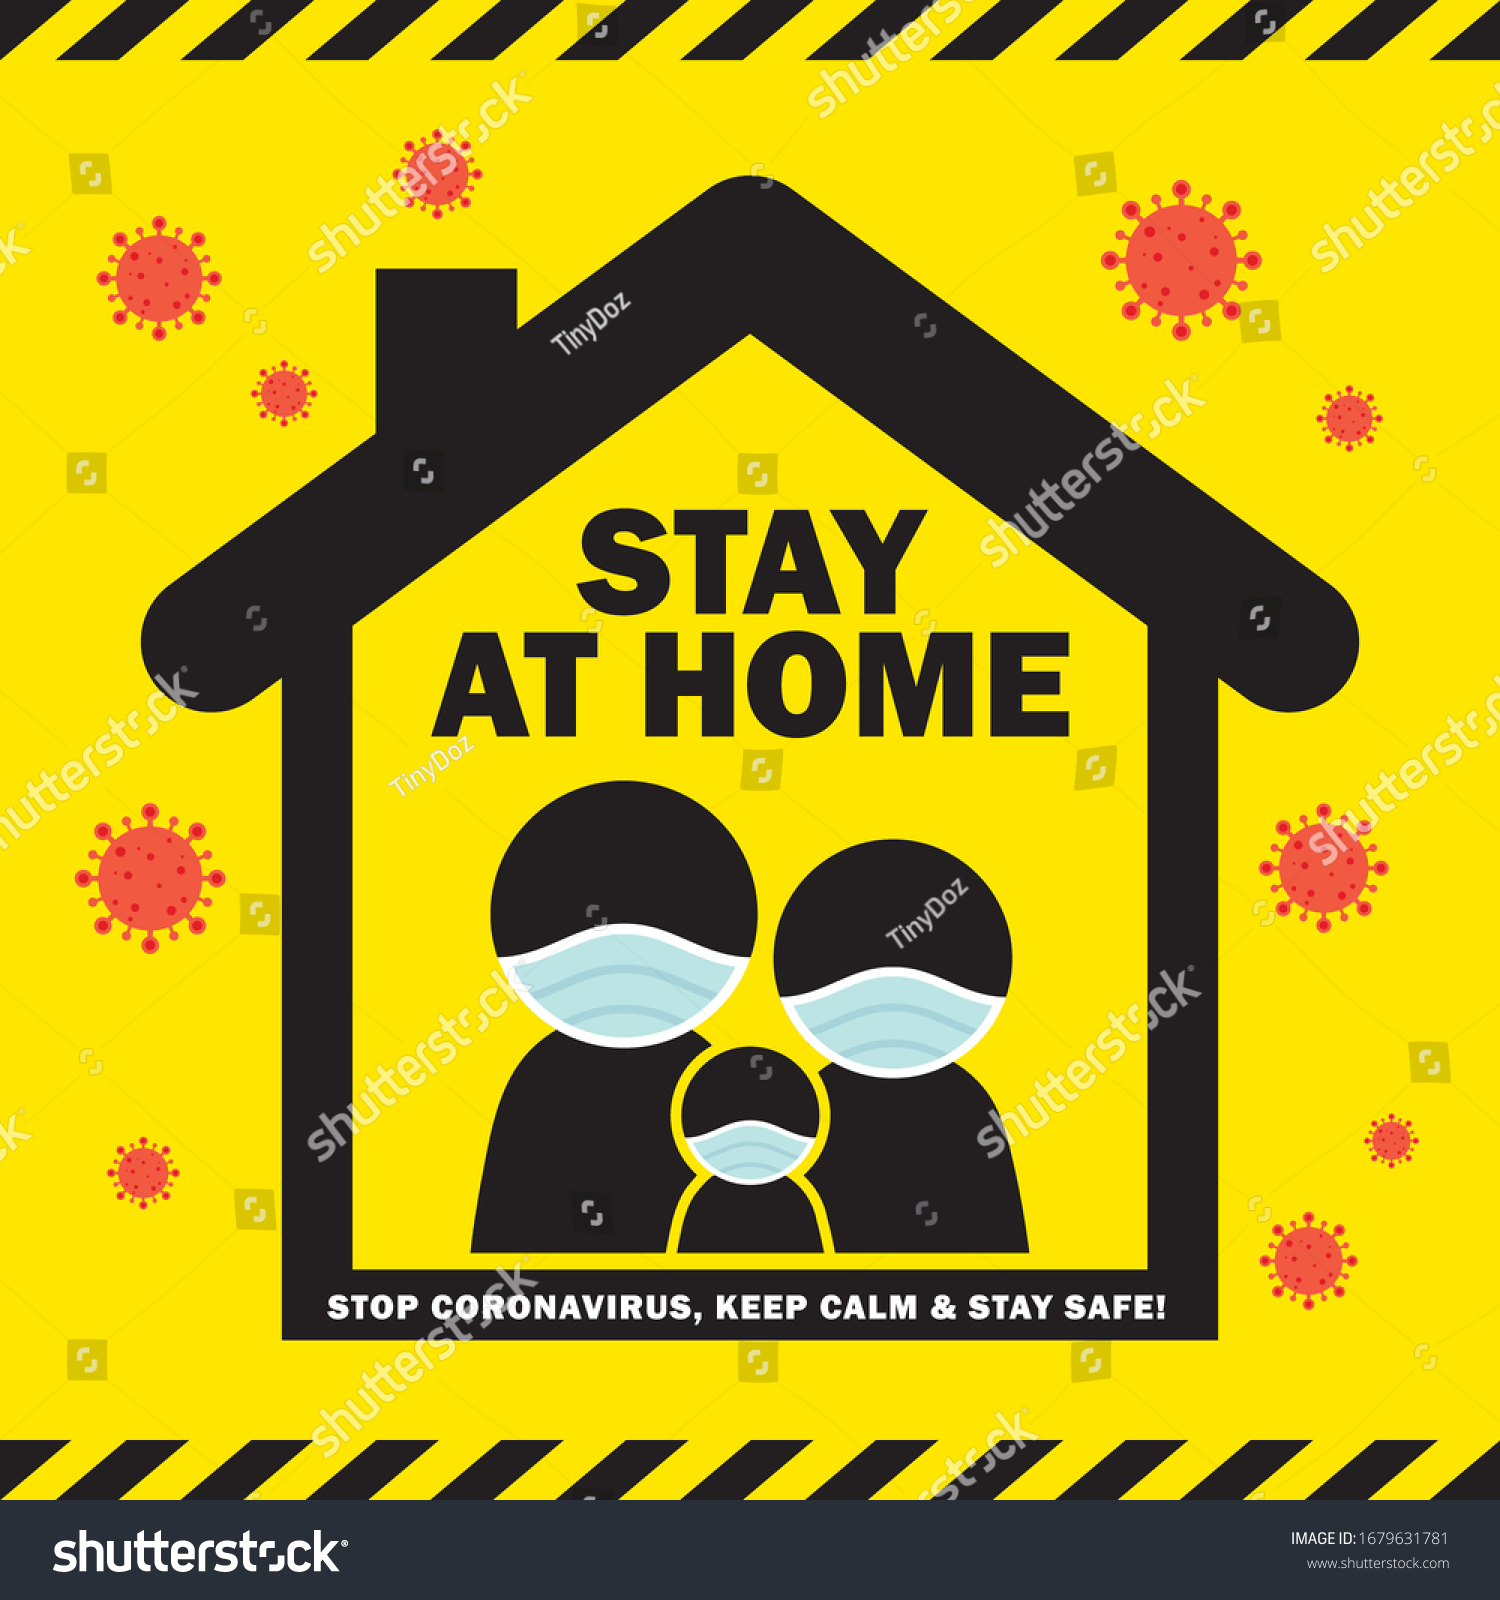 Covid-19 coronavirus quarantine campaign of stay at home flat design. Cartoon stick figure family wearing medical face mask stay home pictogram. Stop coronavirus, keep calm & stay safe illustration. #1679631781